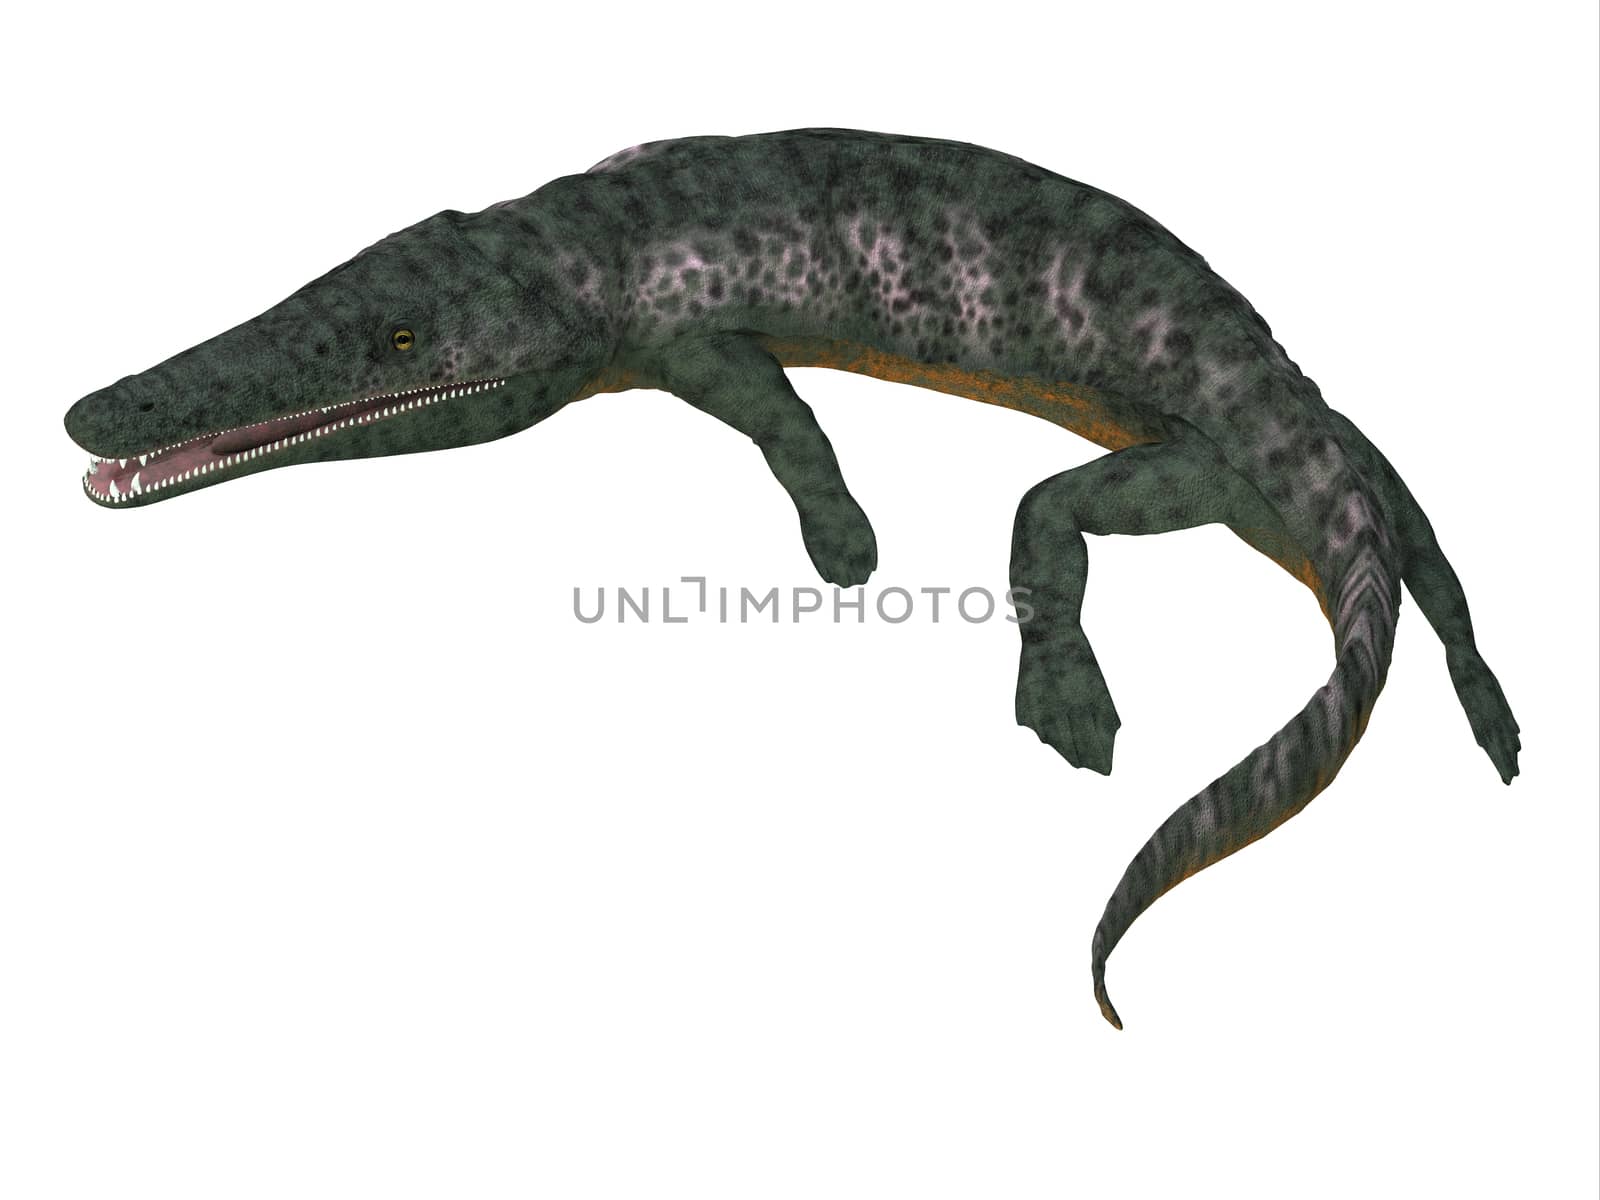 Archegosaurus was an amphibian tetrapod that lived in Europe during the Permian Period.